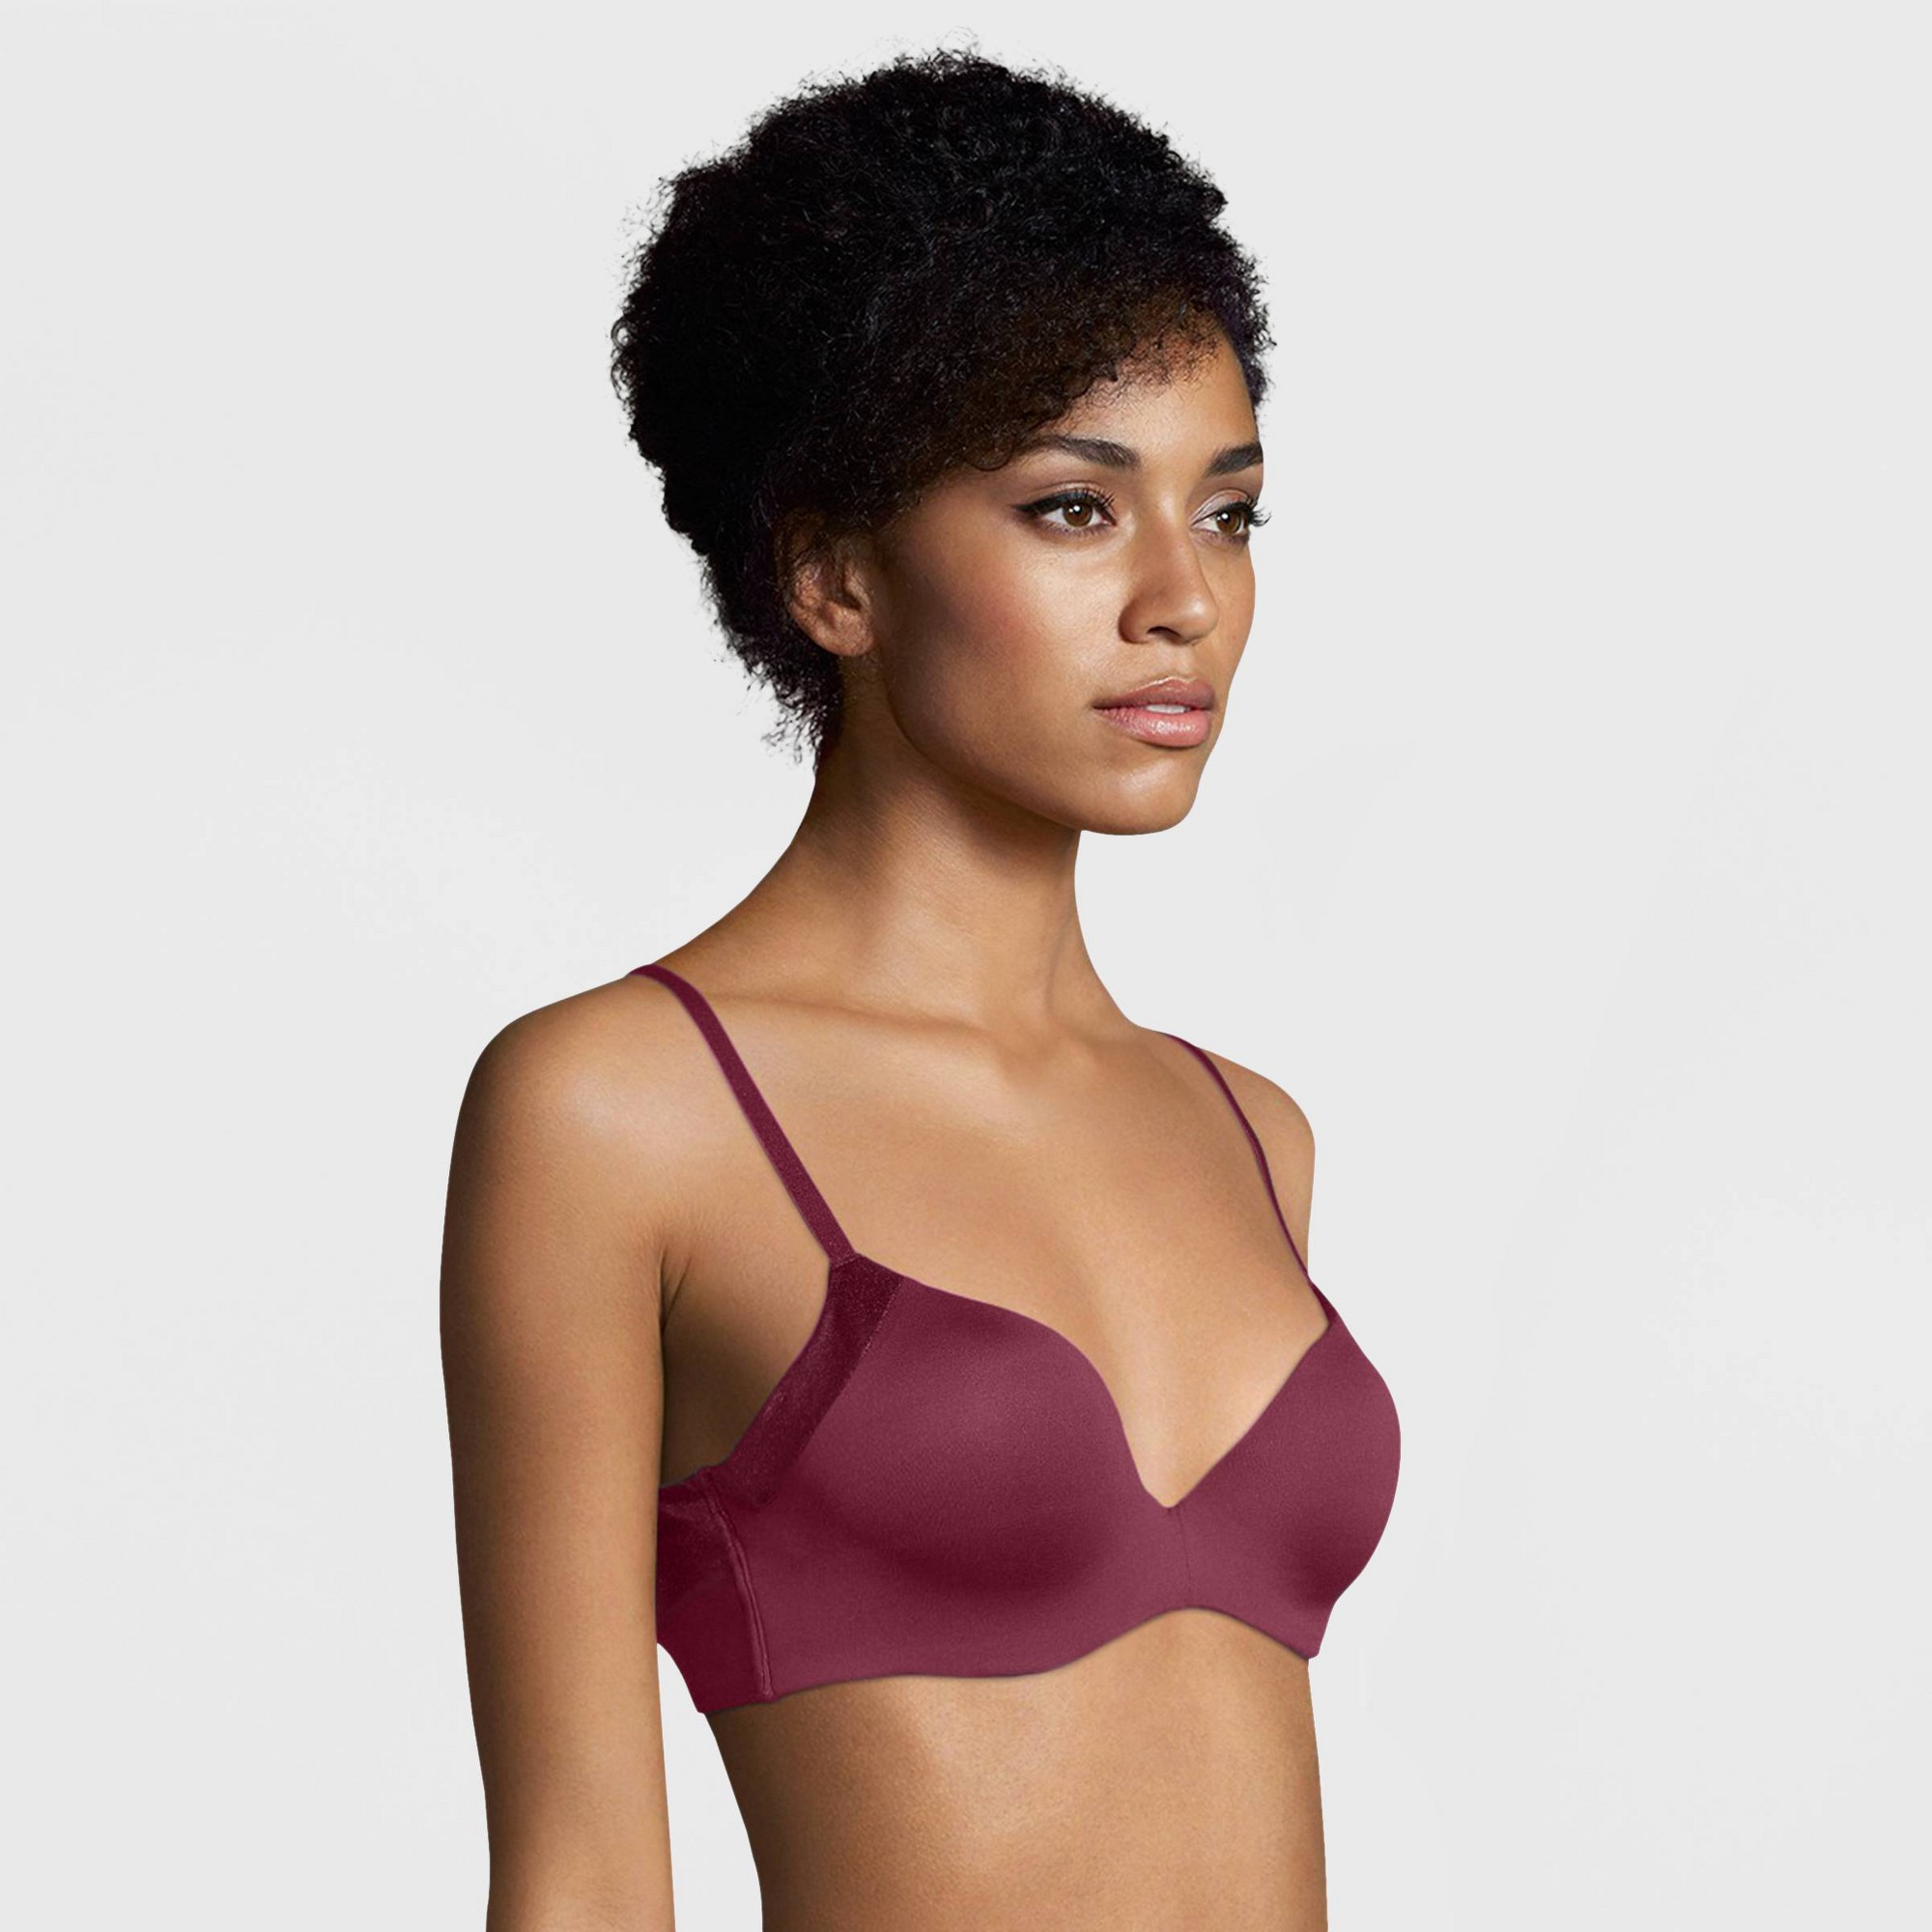 Maidenform Self Expressions Women's Smooth Finish Push-Up Bra SE0009 - Red  40DD, by Maidenform